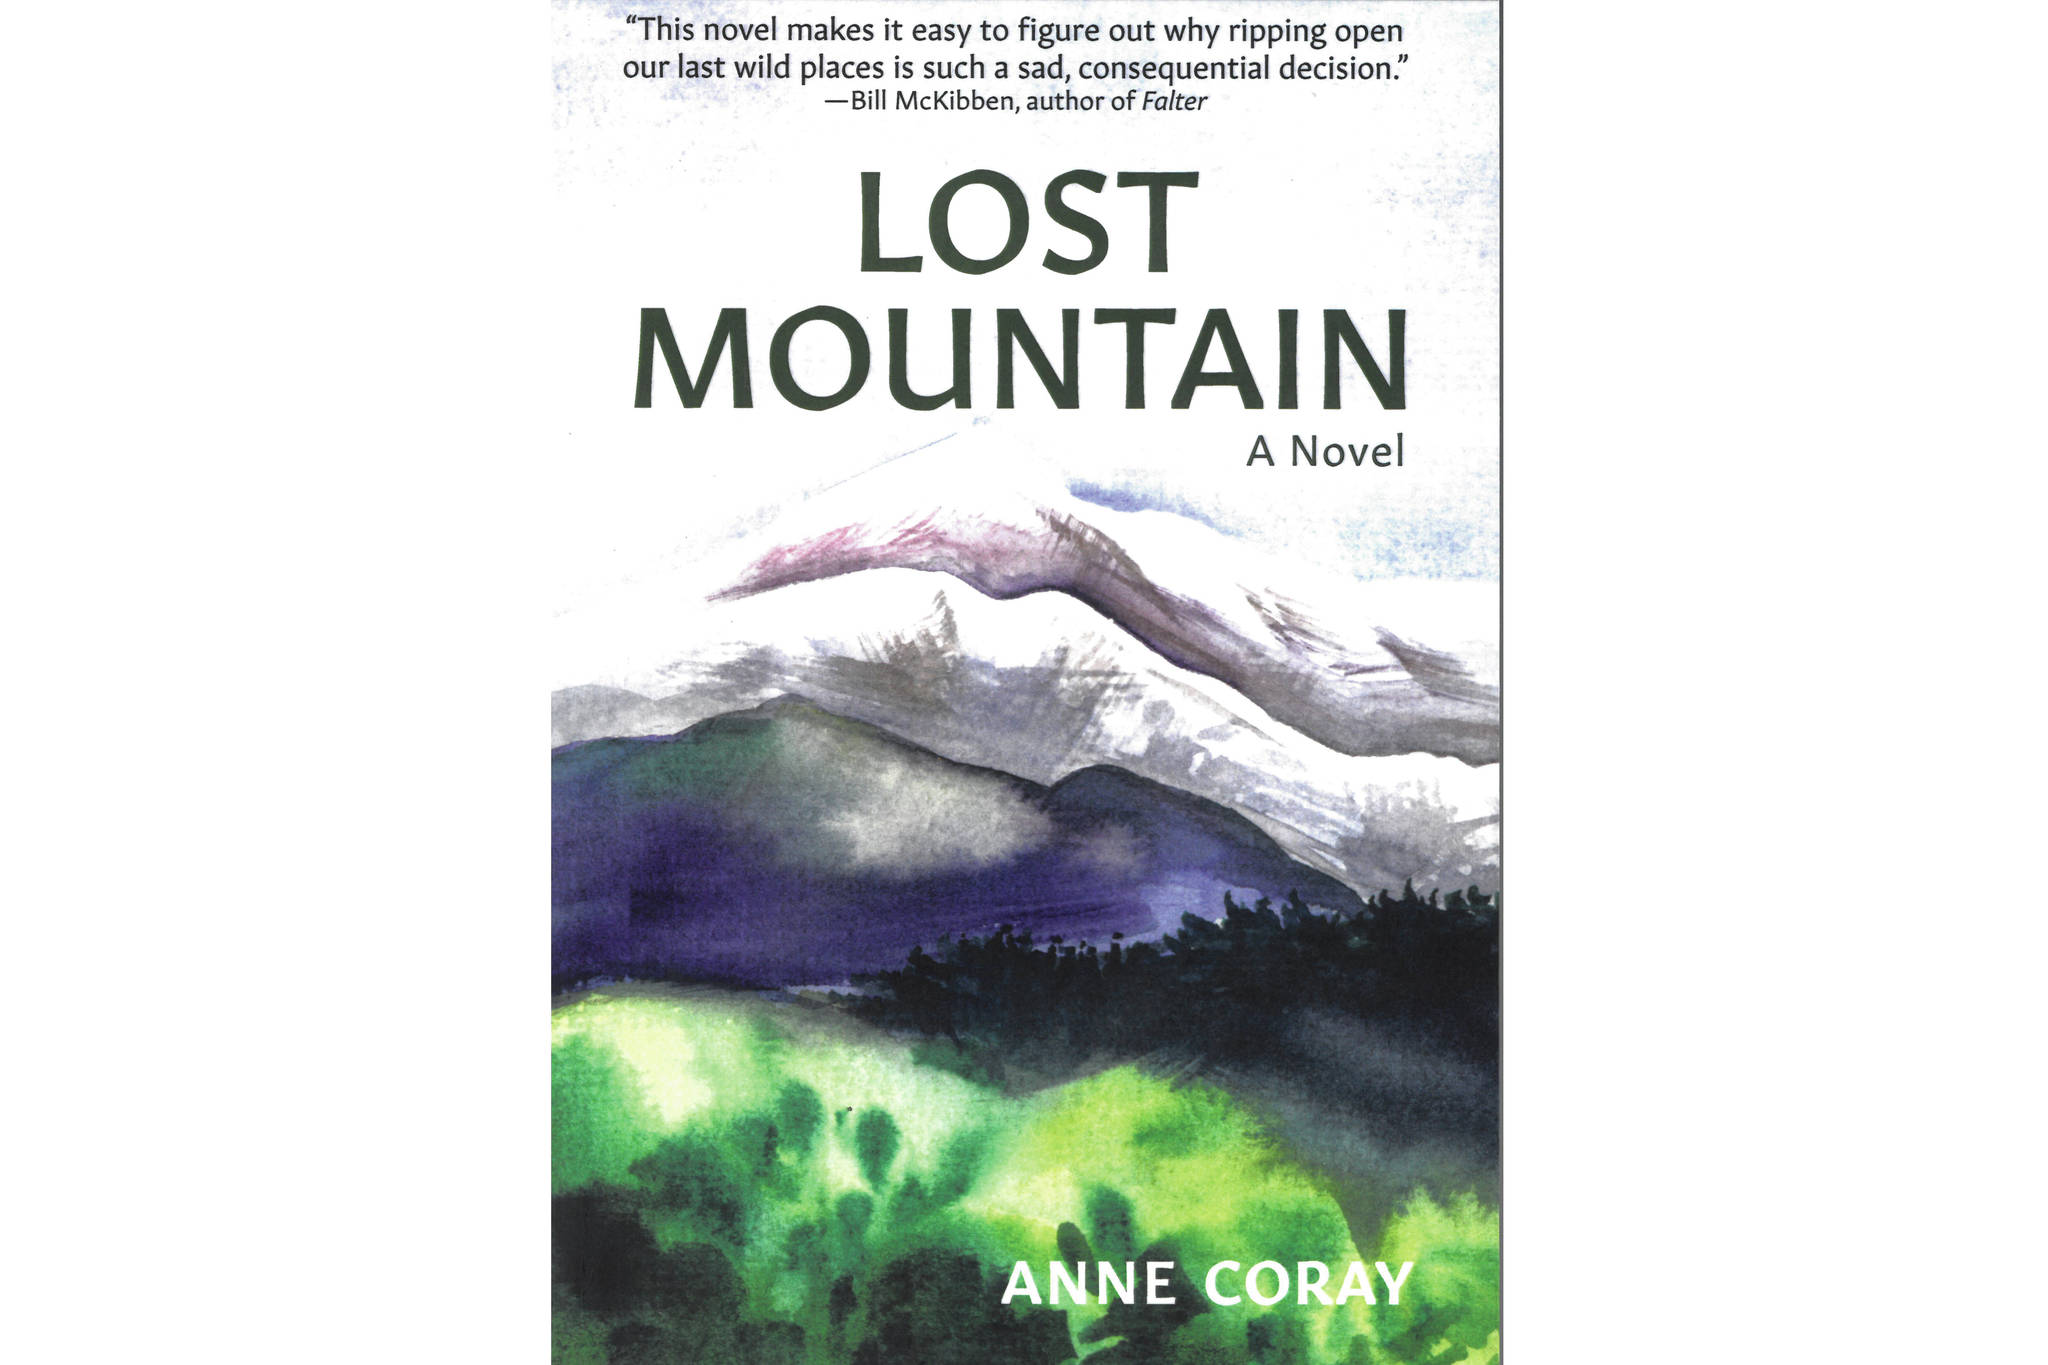 The cover of Anne Coray's novel, "Lost Mountain."